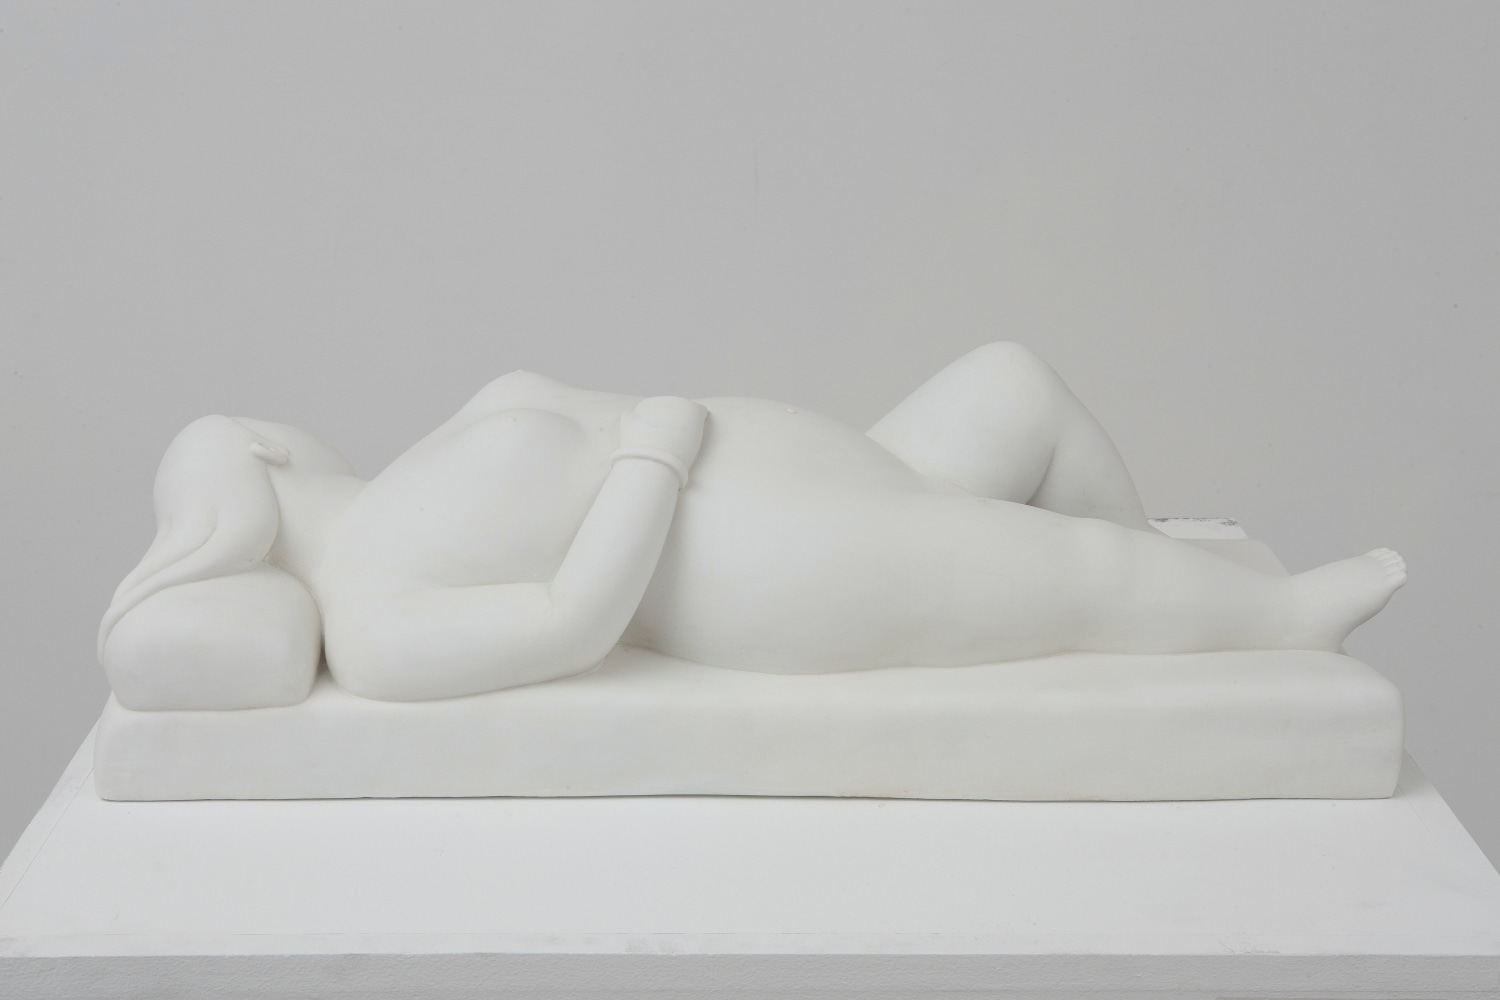 White marble sculpture of a reclining woman on pillow.